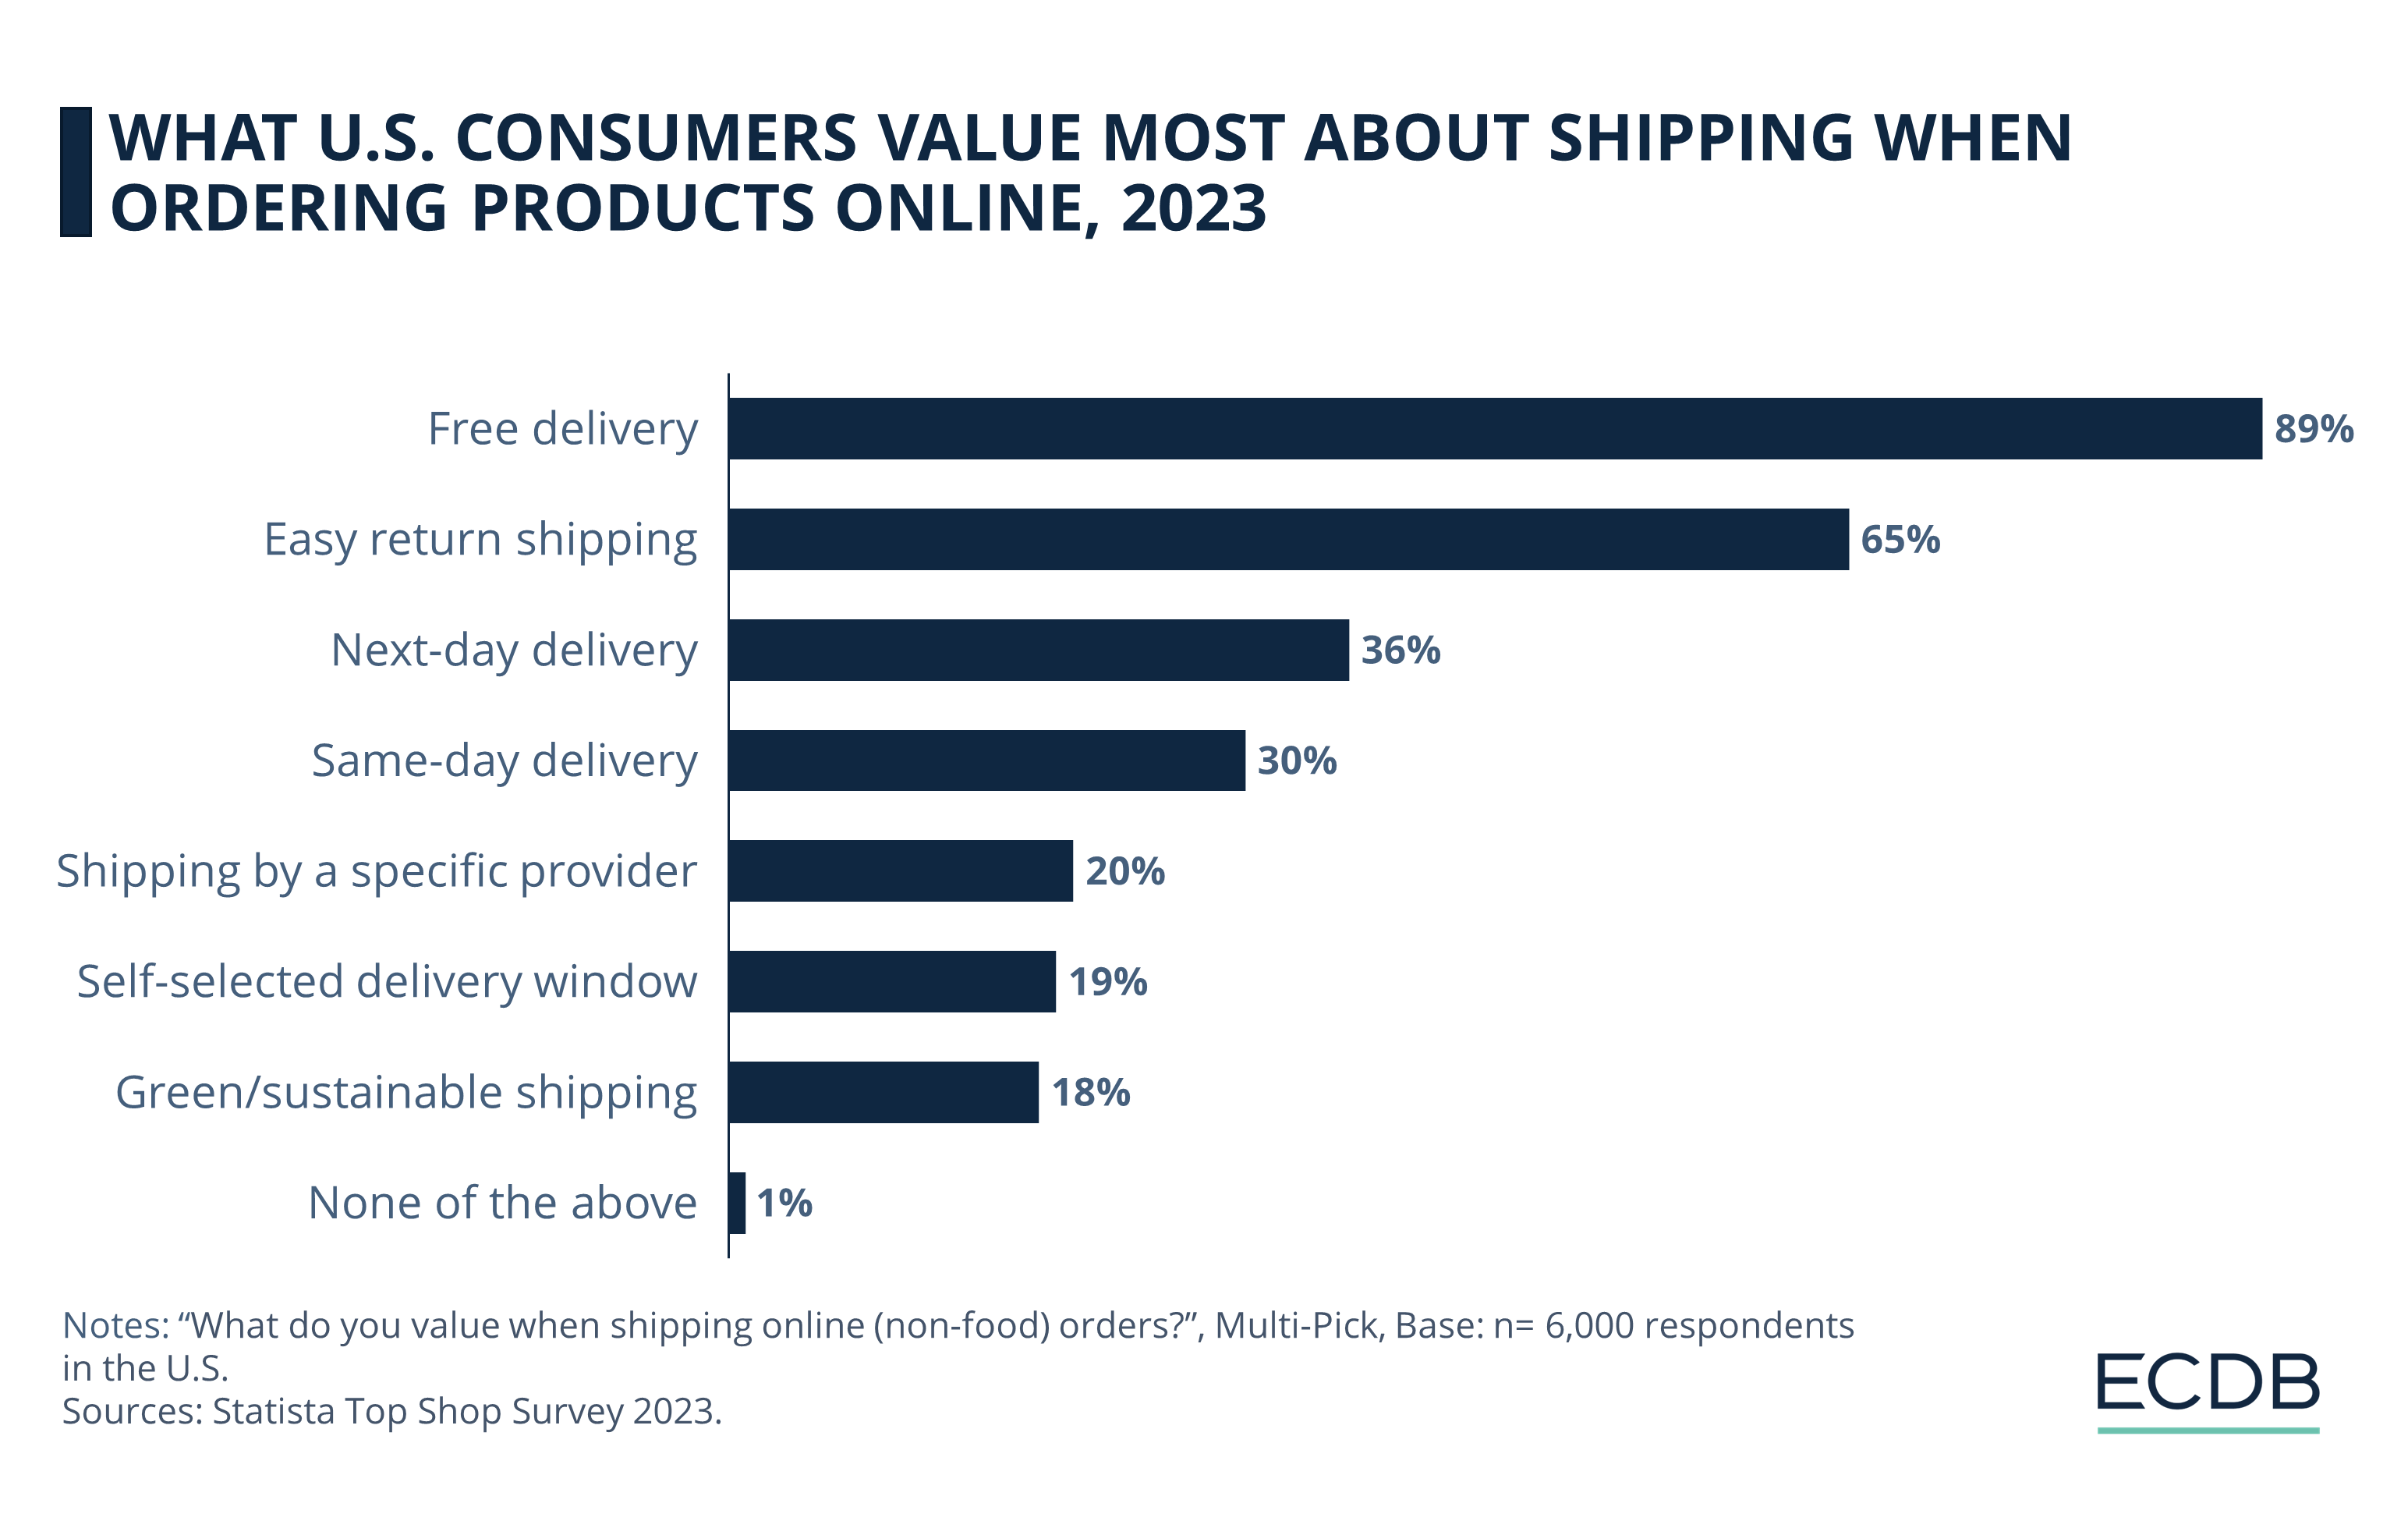 What U.S. Consumers Value About Shipping When Ordering Products Online, 2023